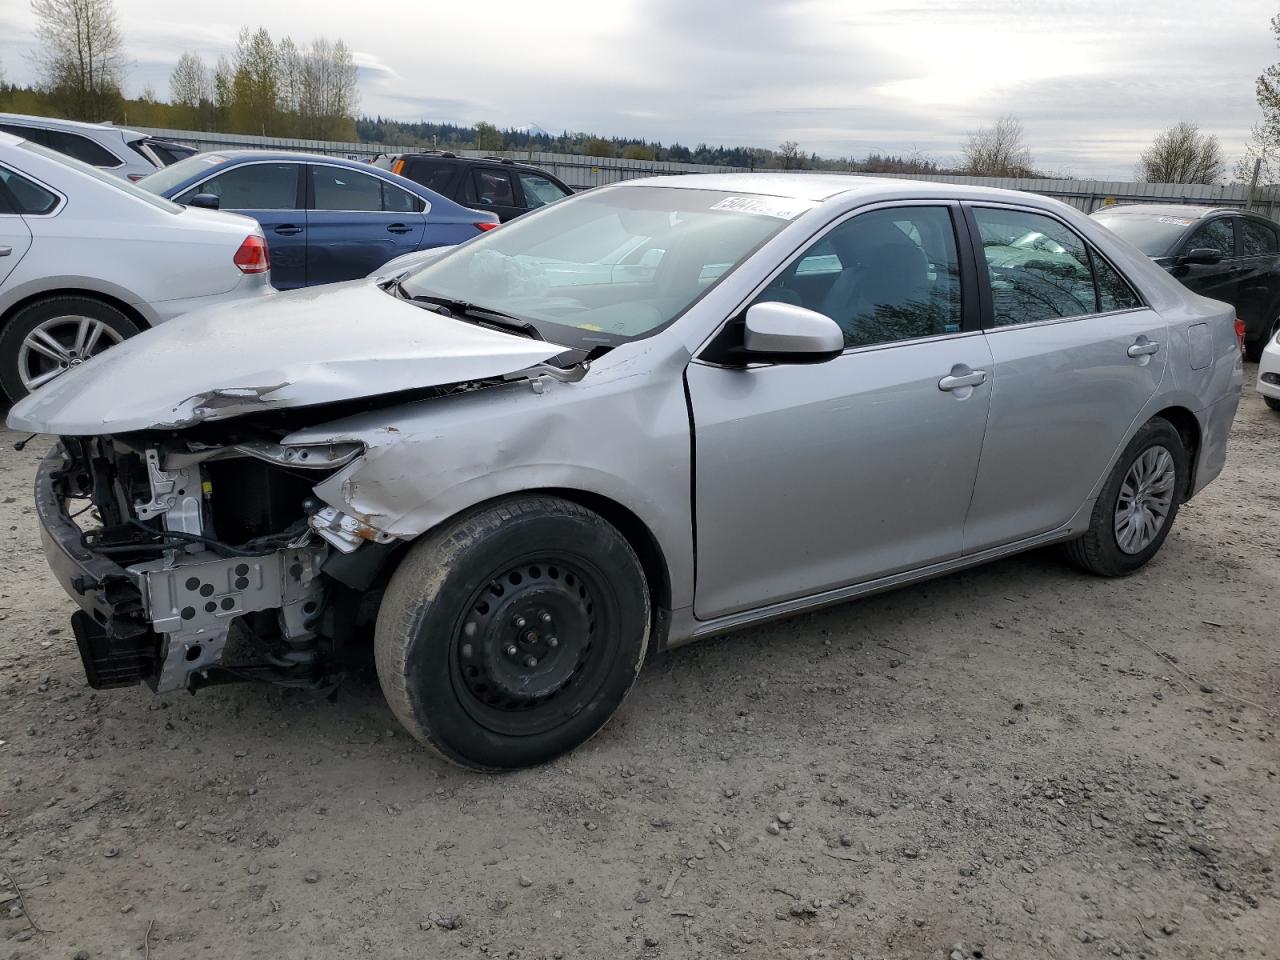 vin: 4T4BF1FK3DR307992 4T4BF1FK3DR307992 2013 toyota camry 2500 for Sale in 98223 6428, Wa - North Seattle, Arlington, Washington, USA